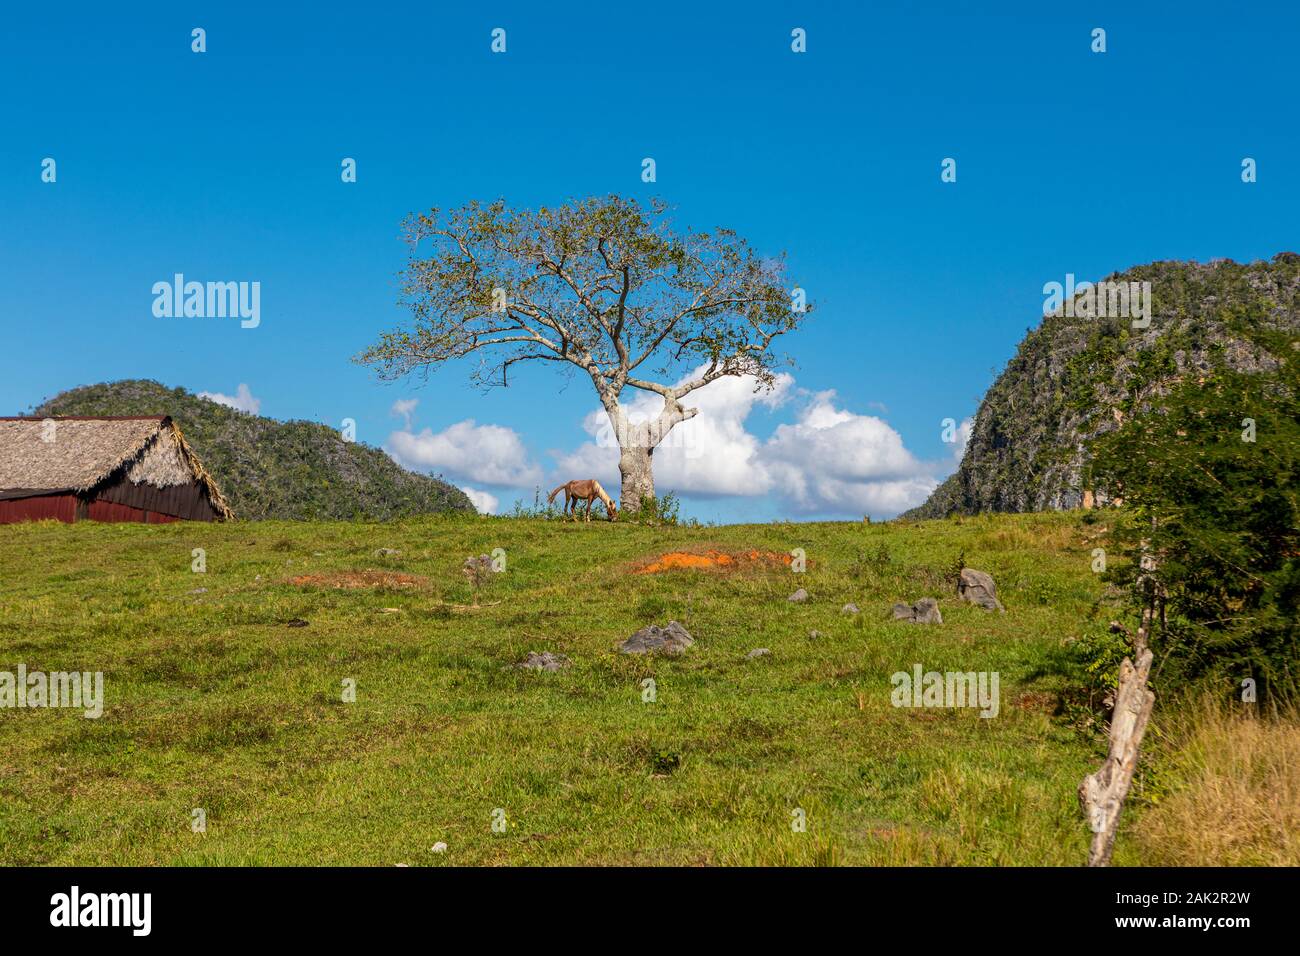 A single tree and a horse on a farm in Vinales Valley, Cuba. Stock Photo